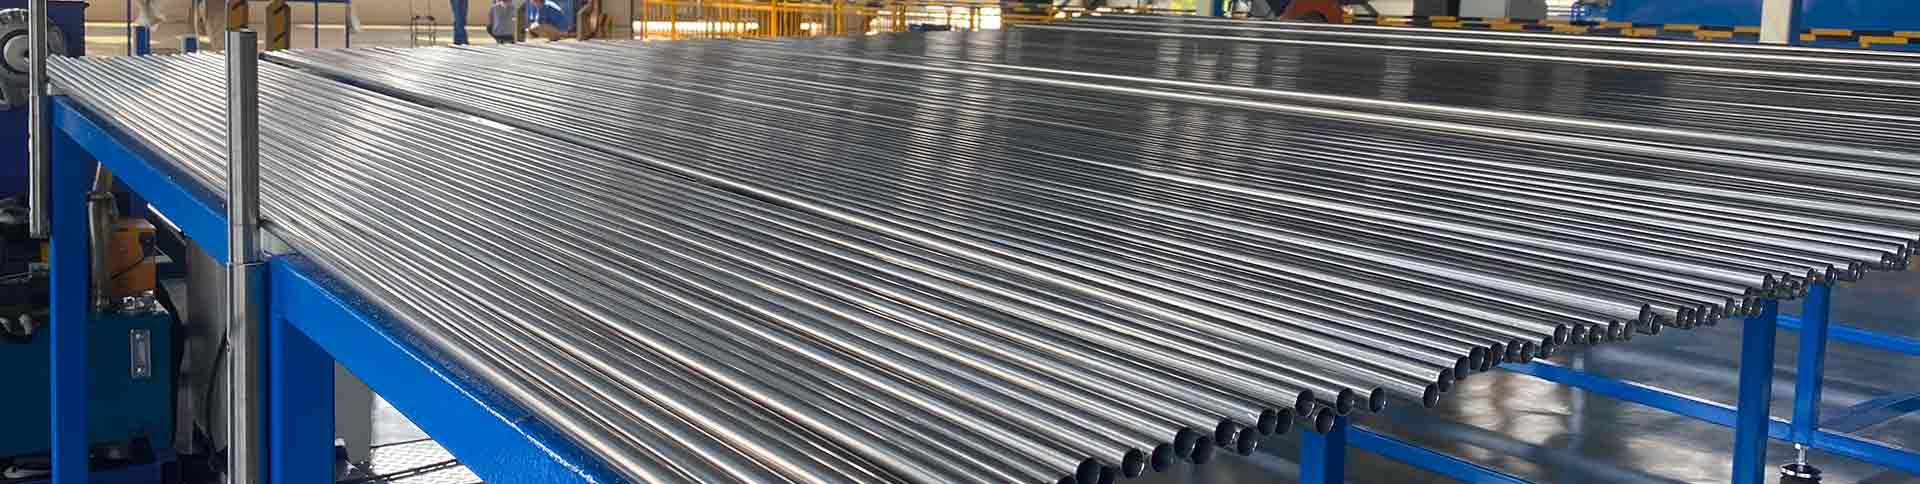 Performance of Stainless Steels